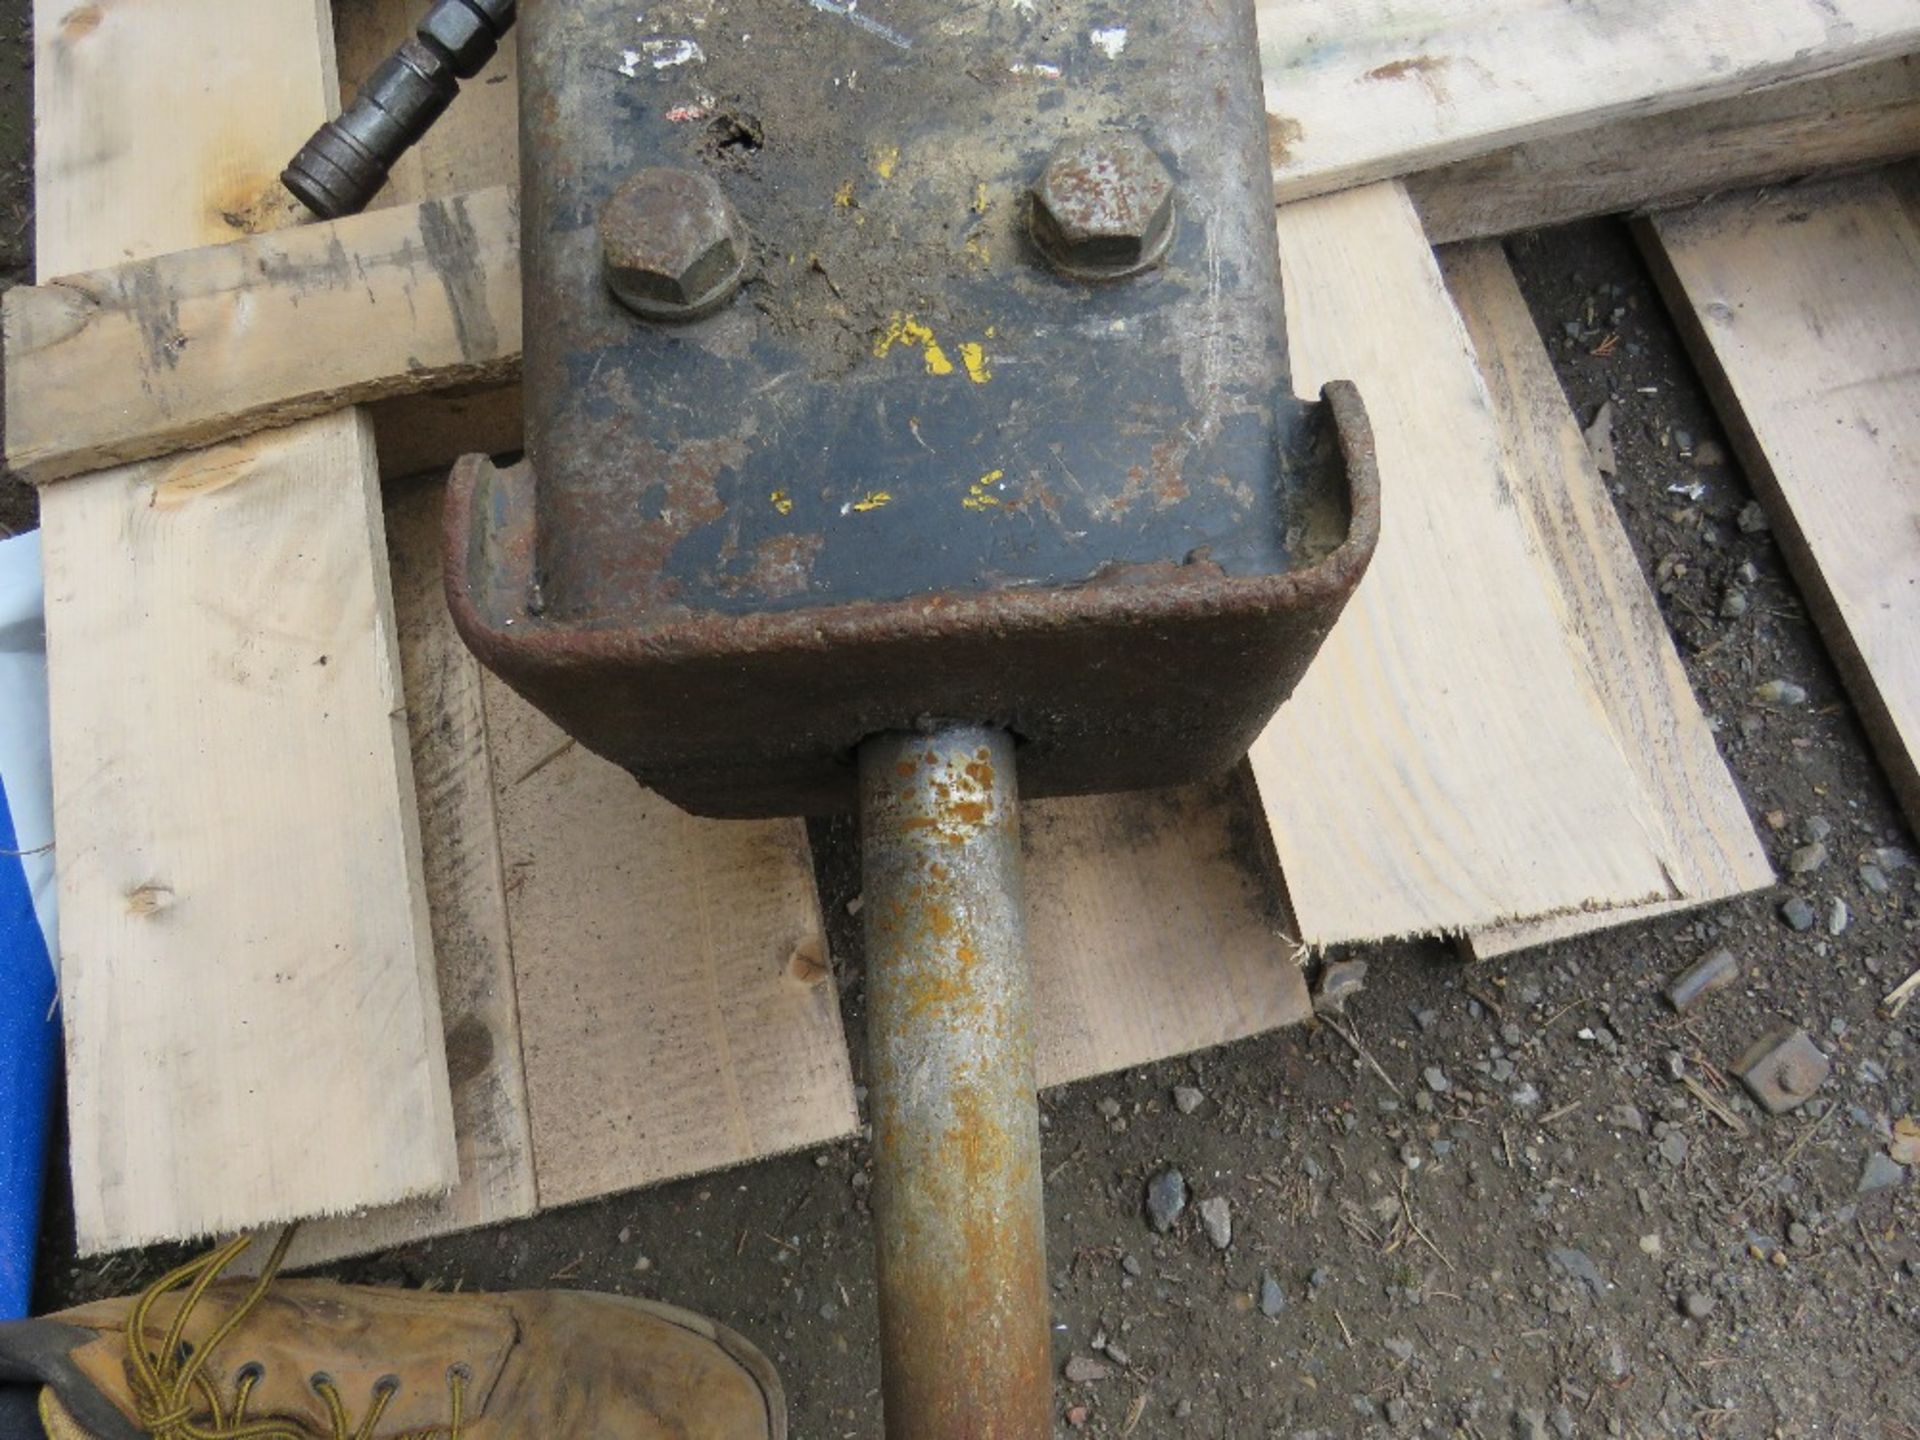 jcb hydraulic excavator breaker with 30mm pins for 3 tonne machine, working when removed from machin - Image 3 of 4